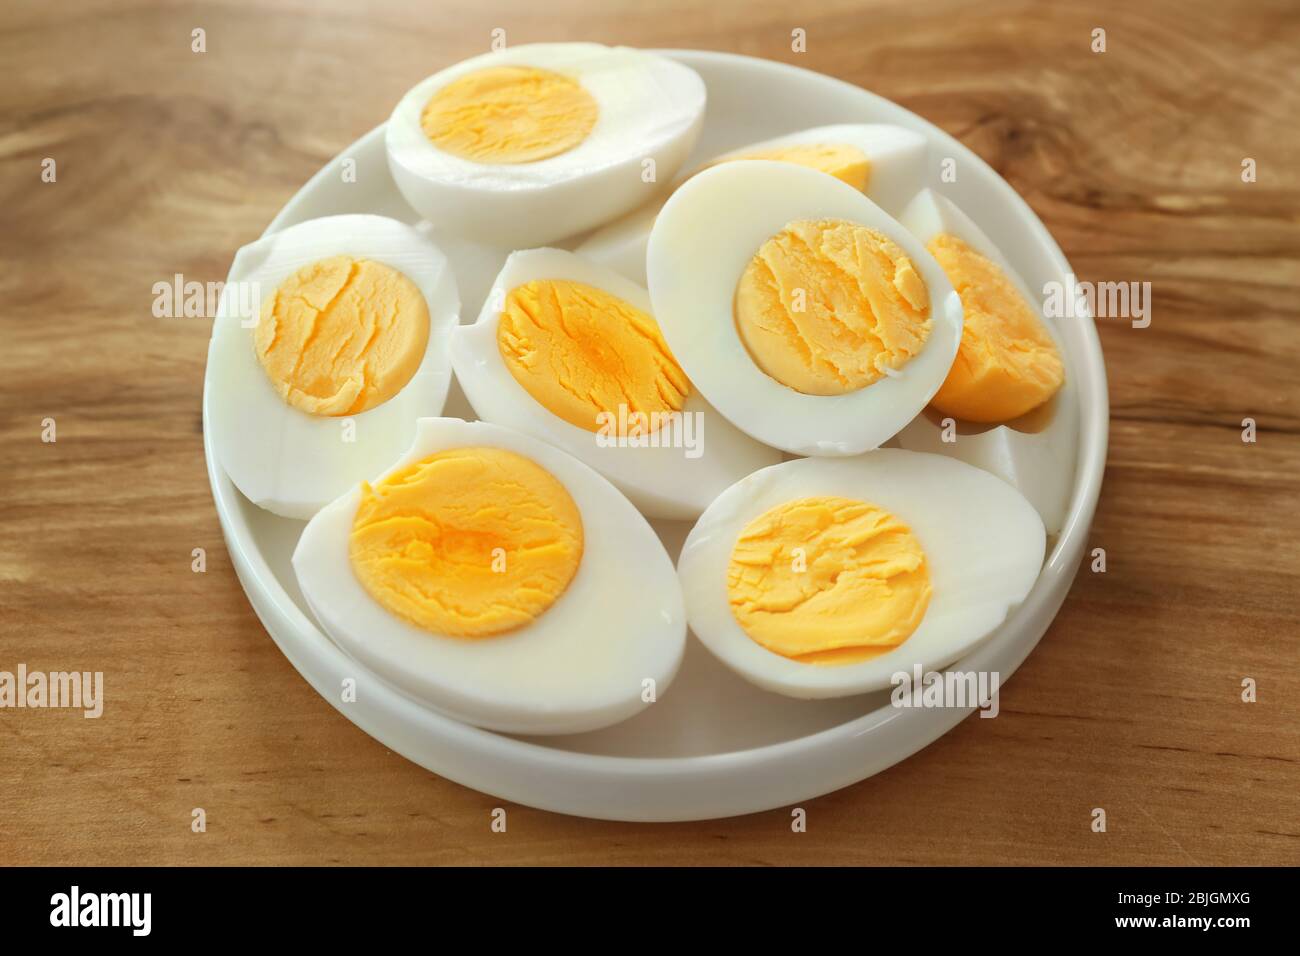 boiled eggs on a floral plate on a transparent background 20965913 PNG